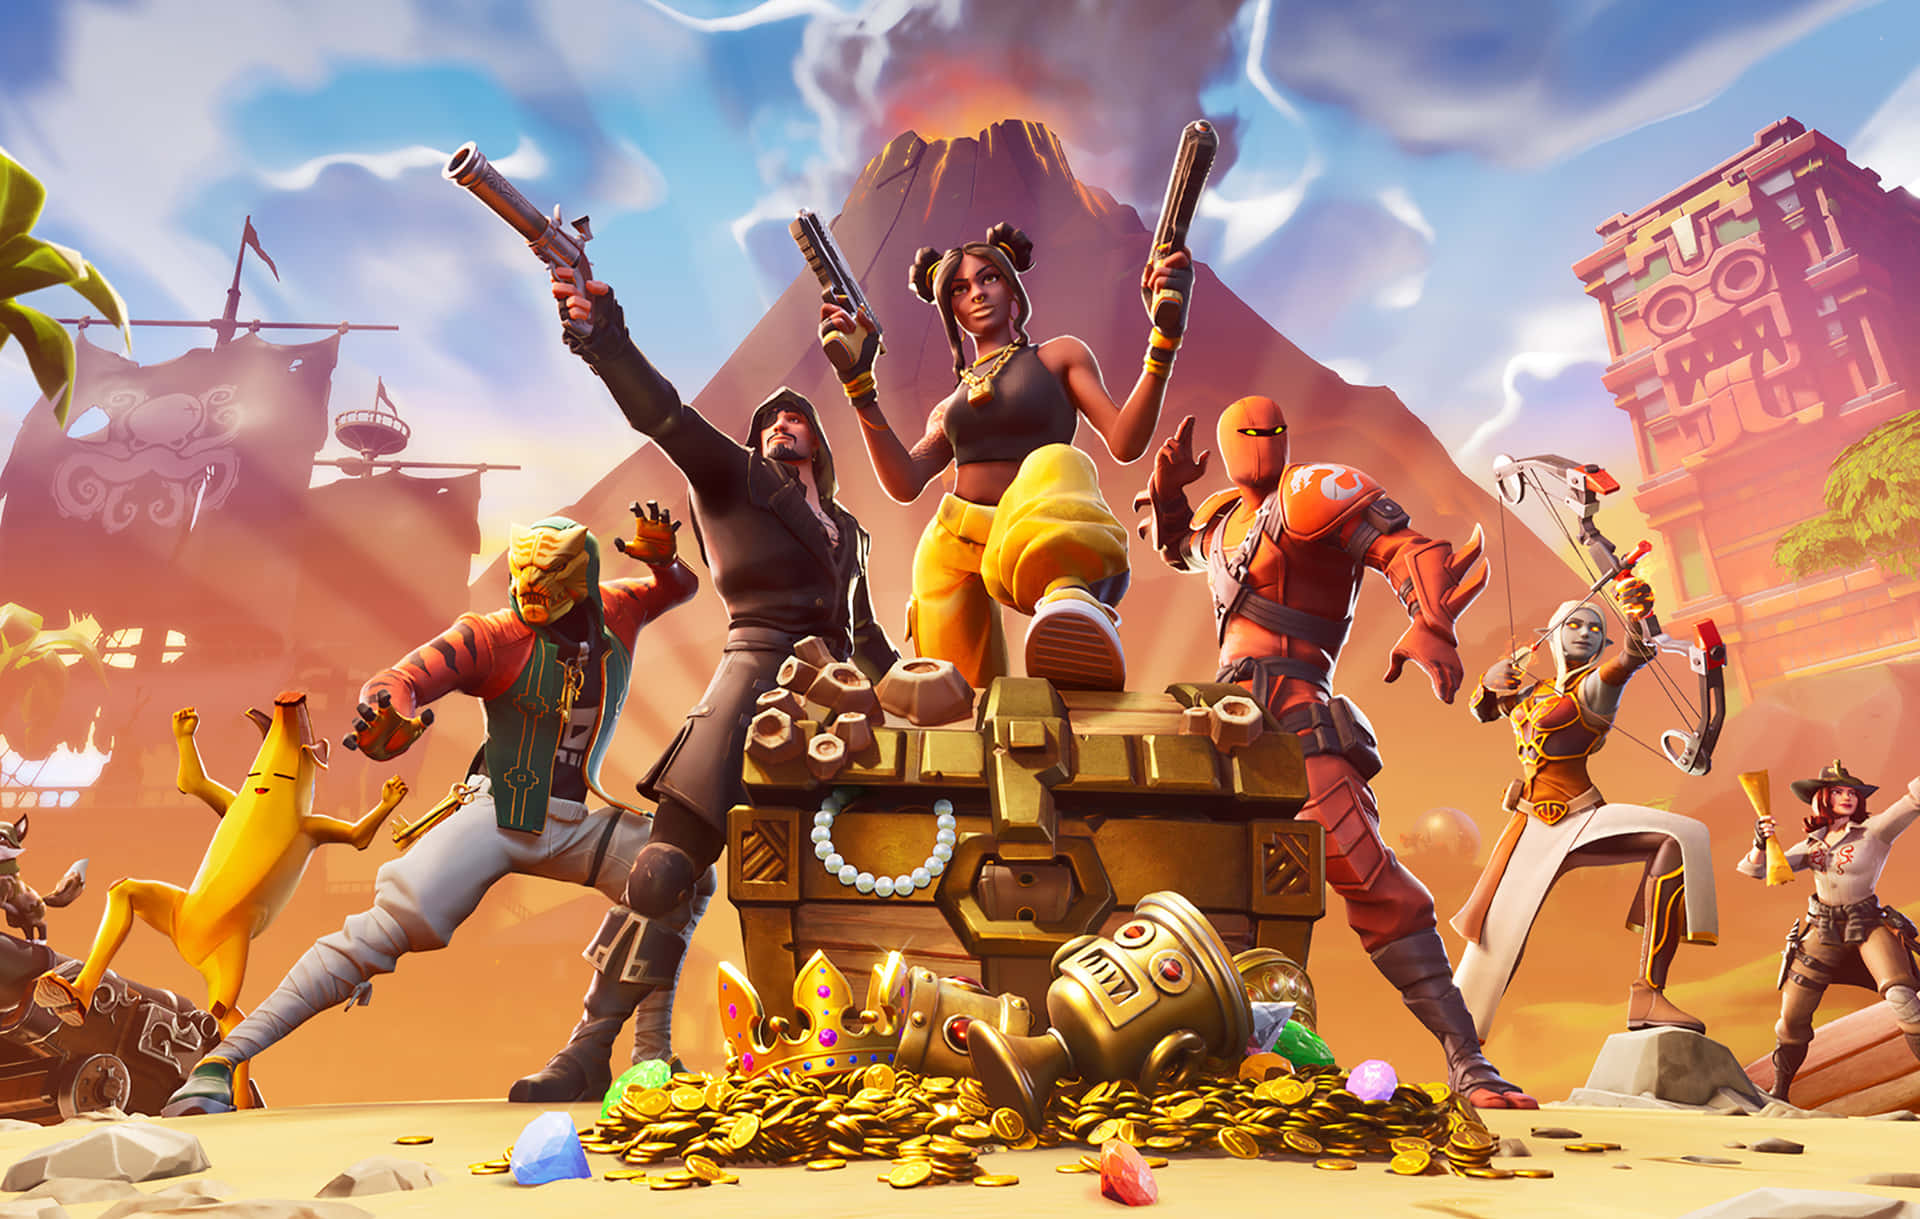 Explore new locations and battle your opponents in Fortnite Season 4 Chapter 2 Wallpaper